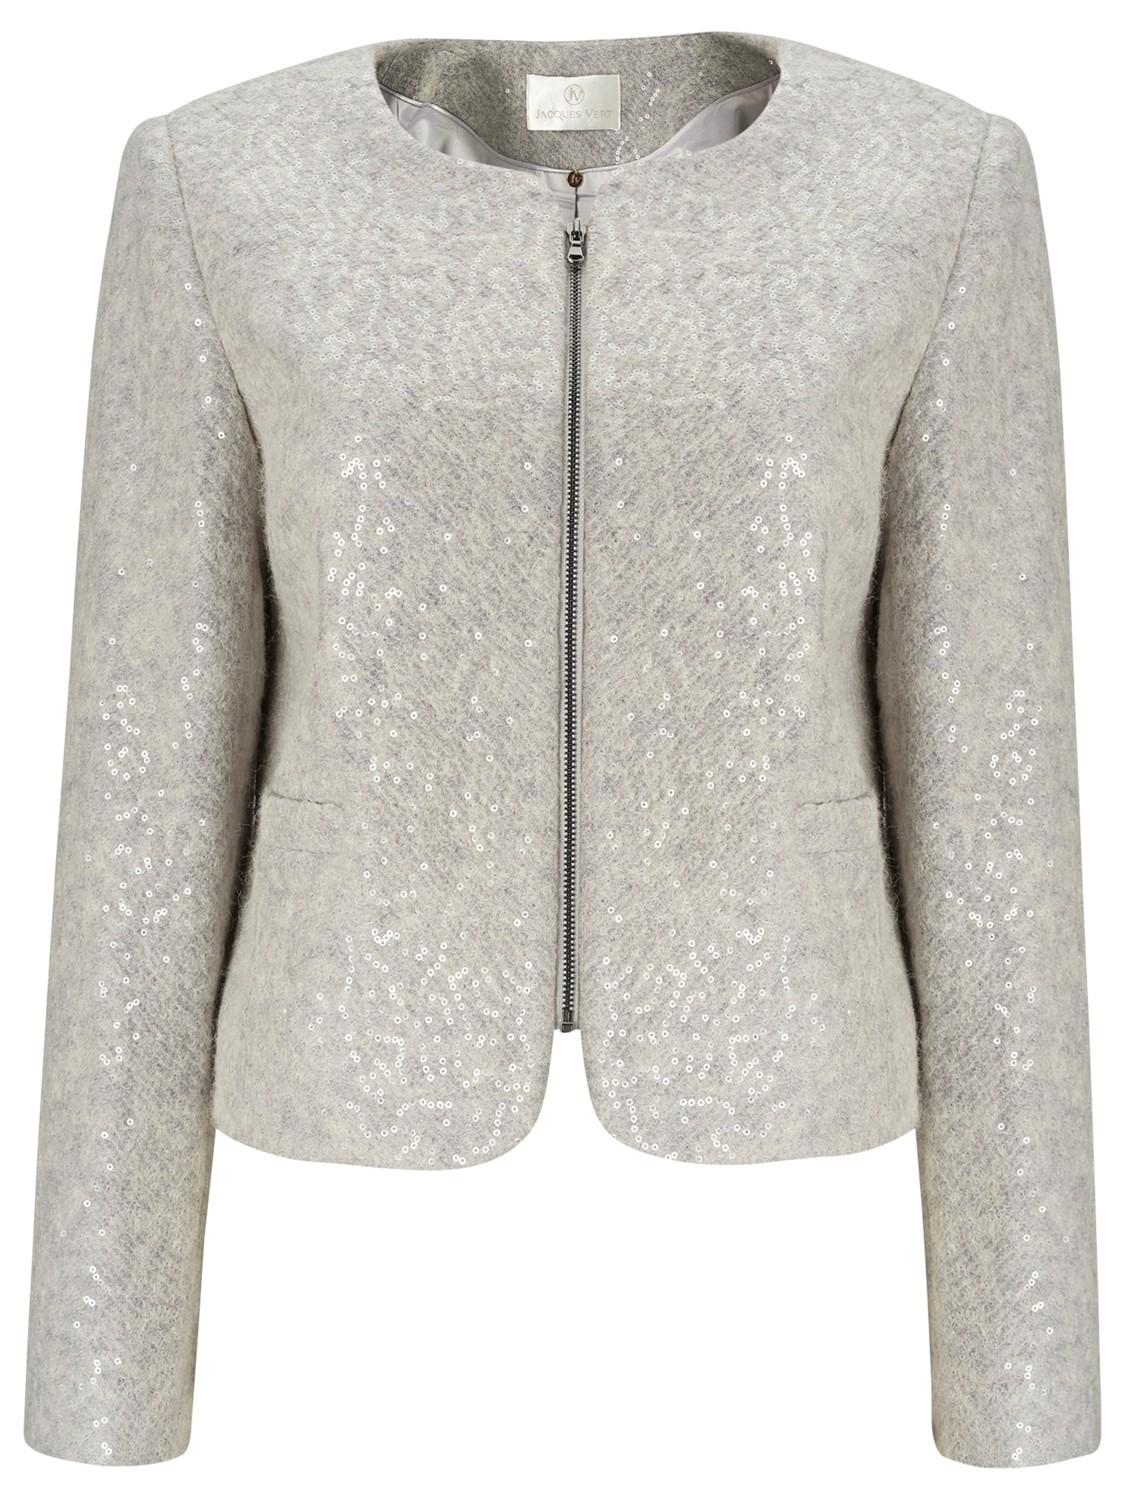 Jacques vert Sequin Knit Jacket in Gray | Lyst